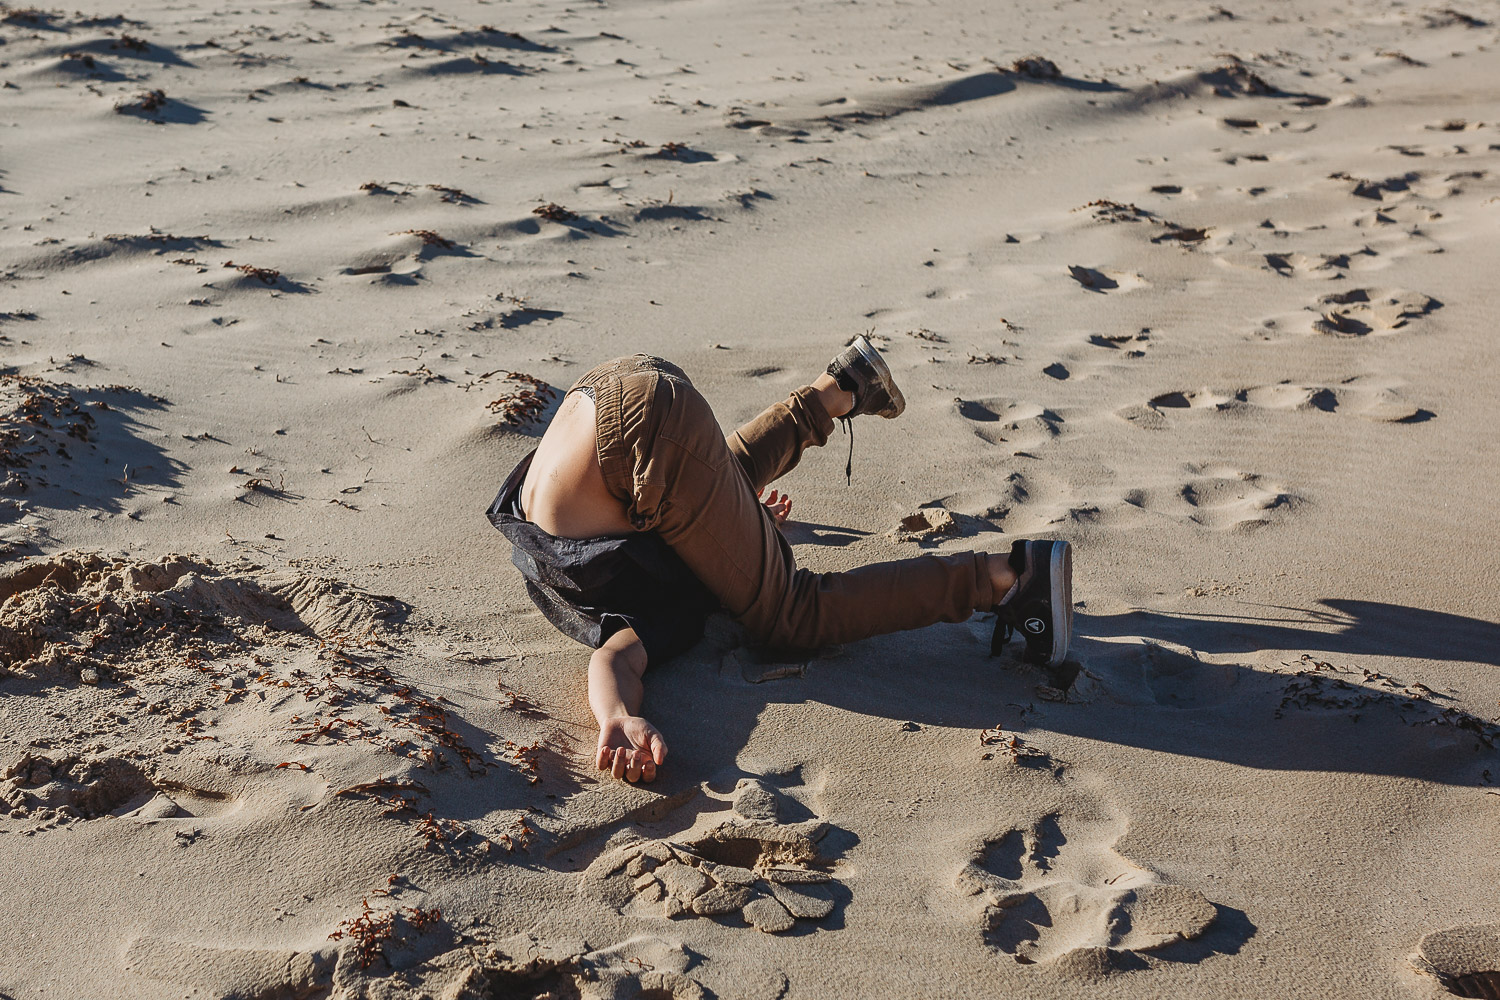 Boy fallen over on the sand in a humourous position